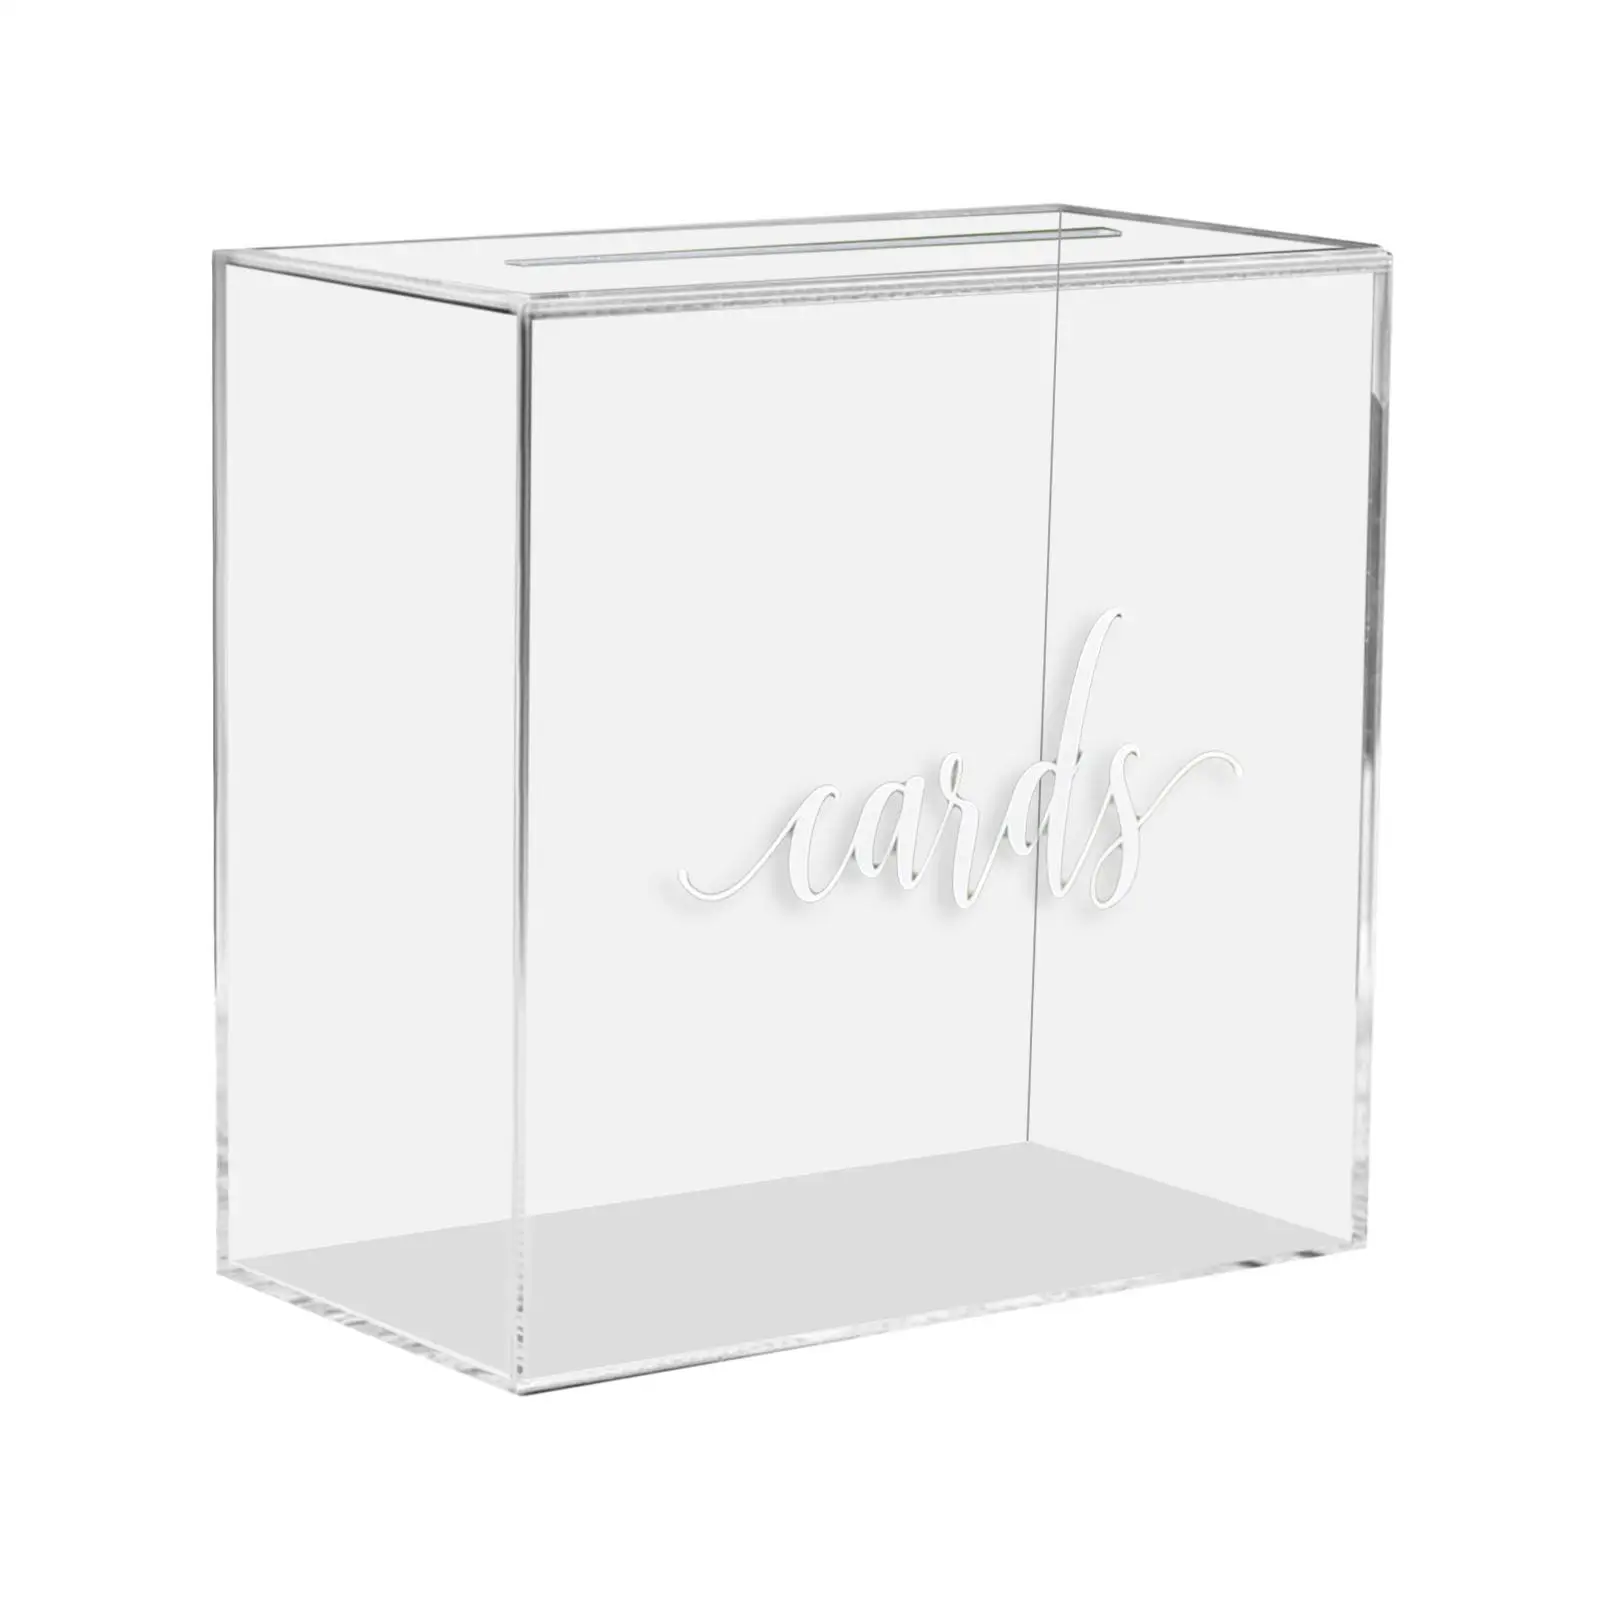 Acrylic wedding, Large Decorations Blessing DIY Large Acrylic Card Box, for Party Graduation Anniversary Shower